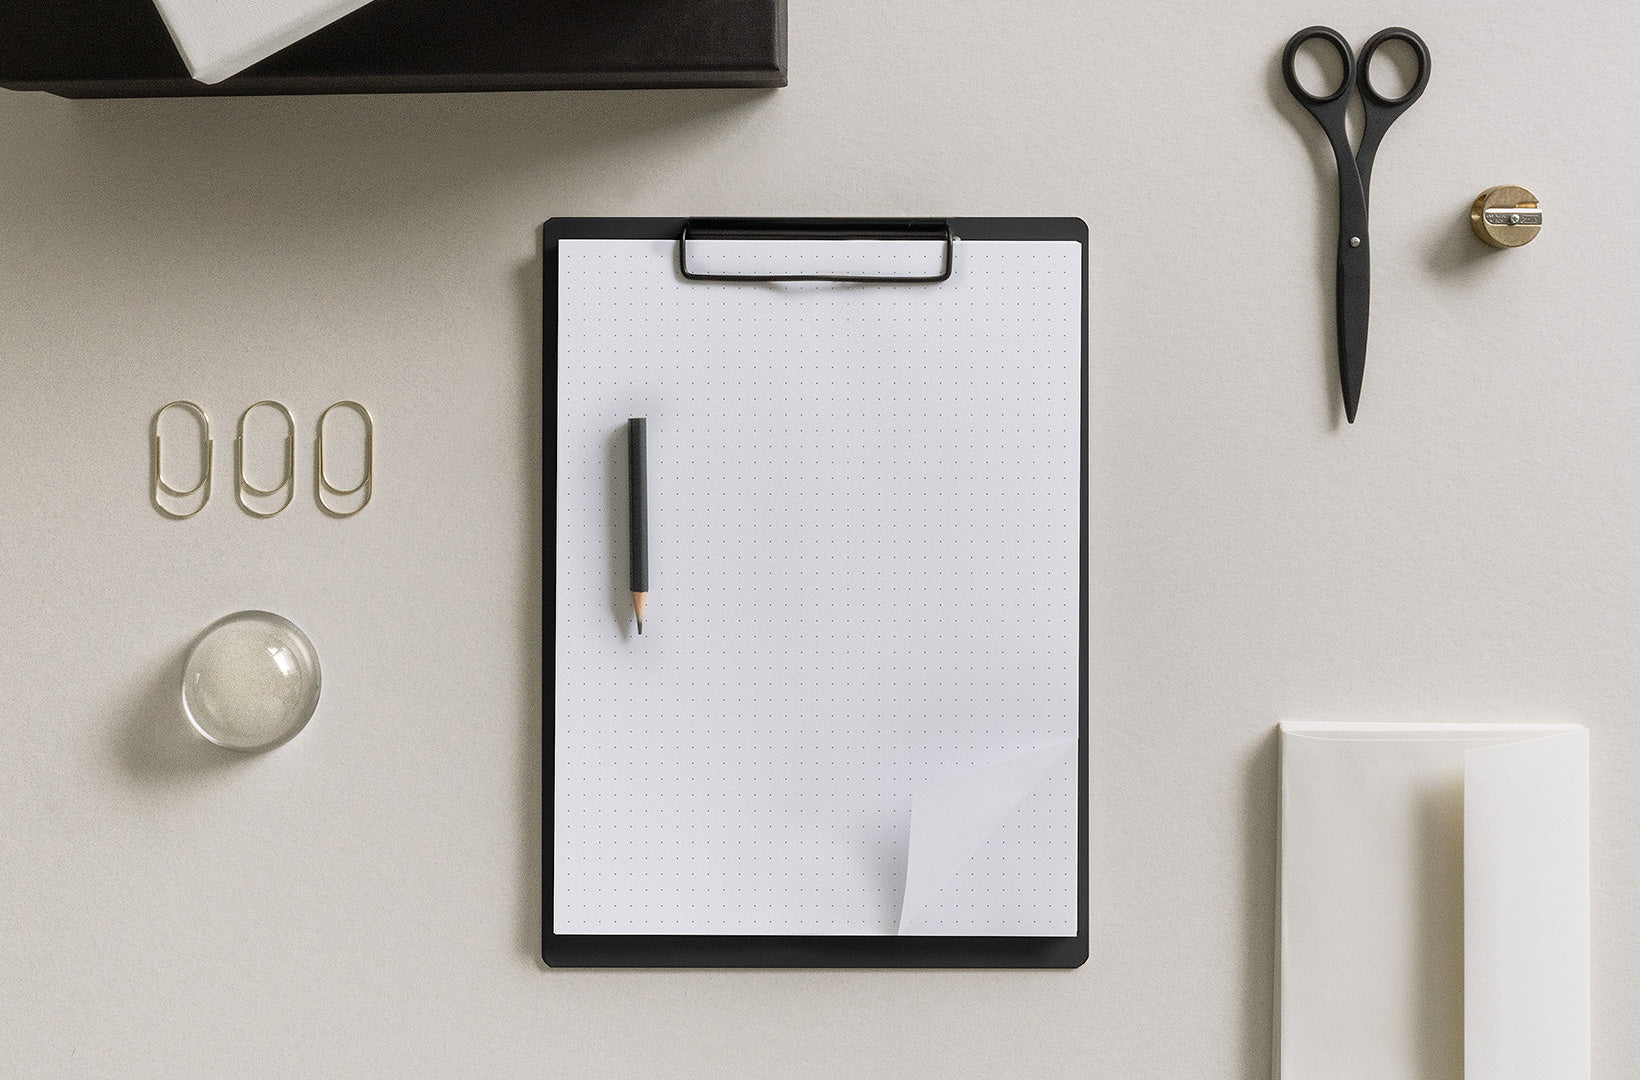 The Writing clipboard with Dot Grid Pad sits on a beige background. Other accessoreis are strewn about, including scissors, paper clips, envelopes, and a brass sharpener